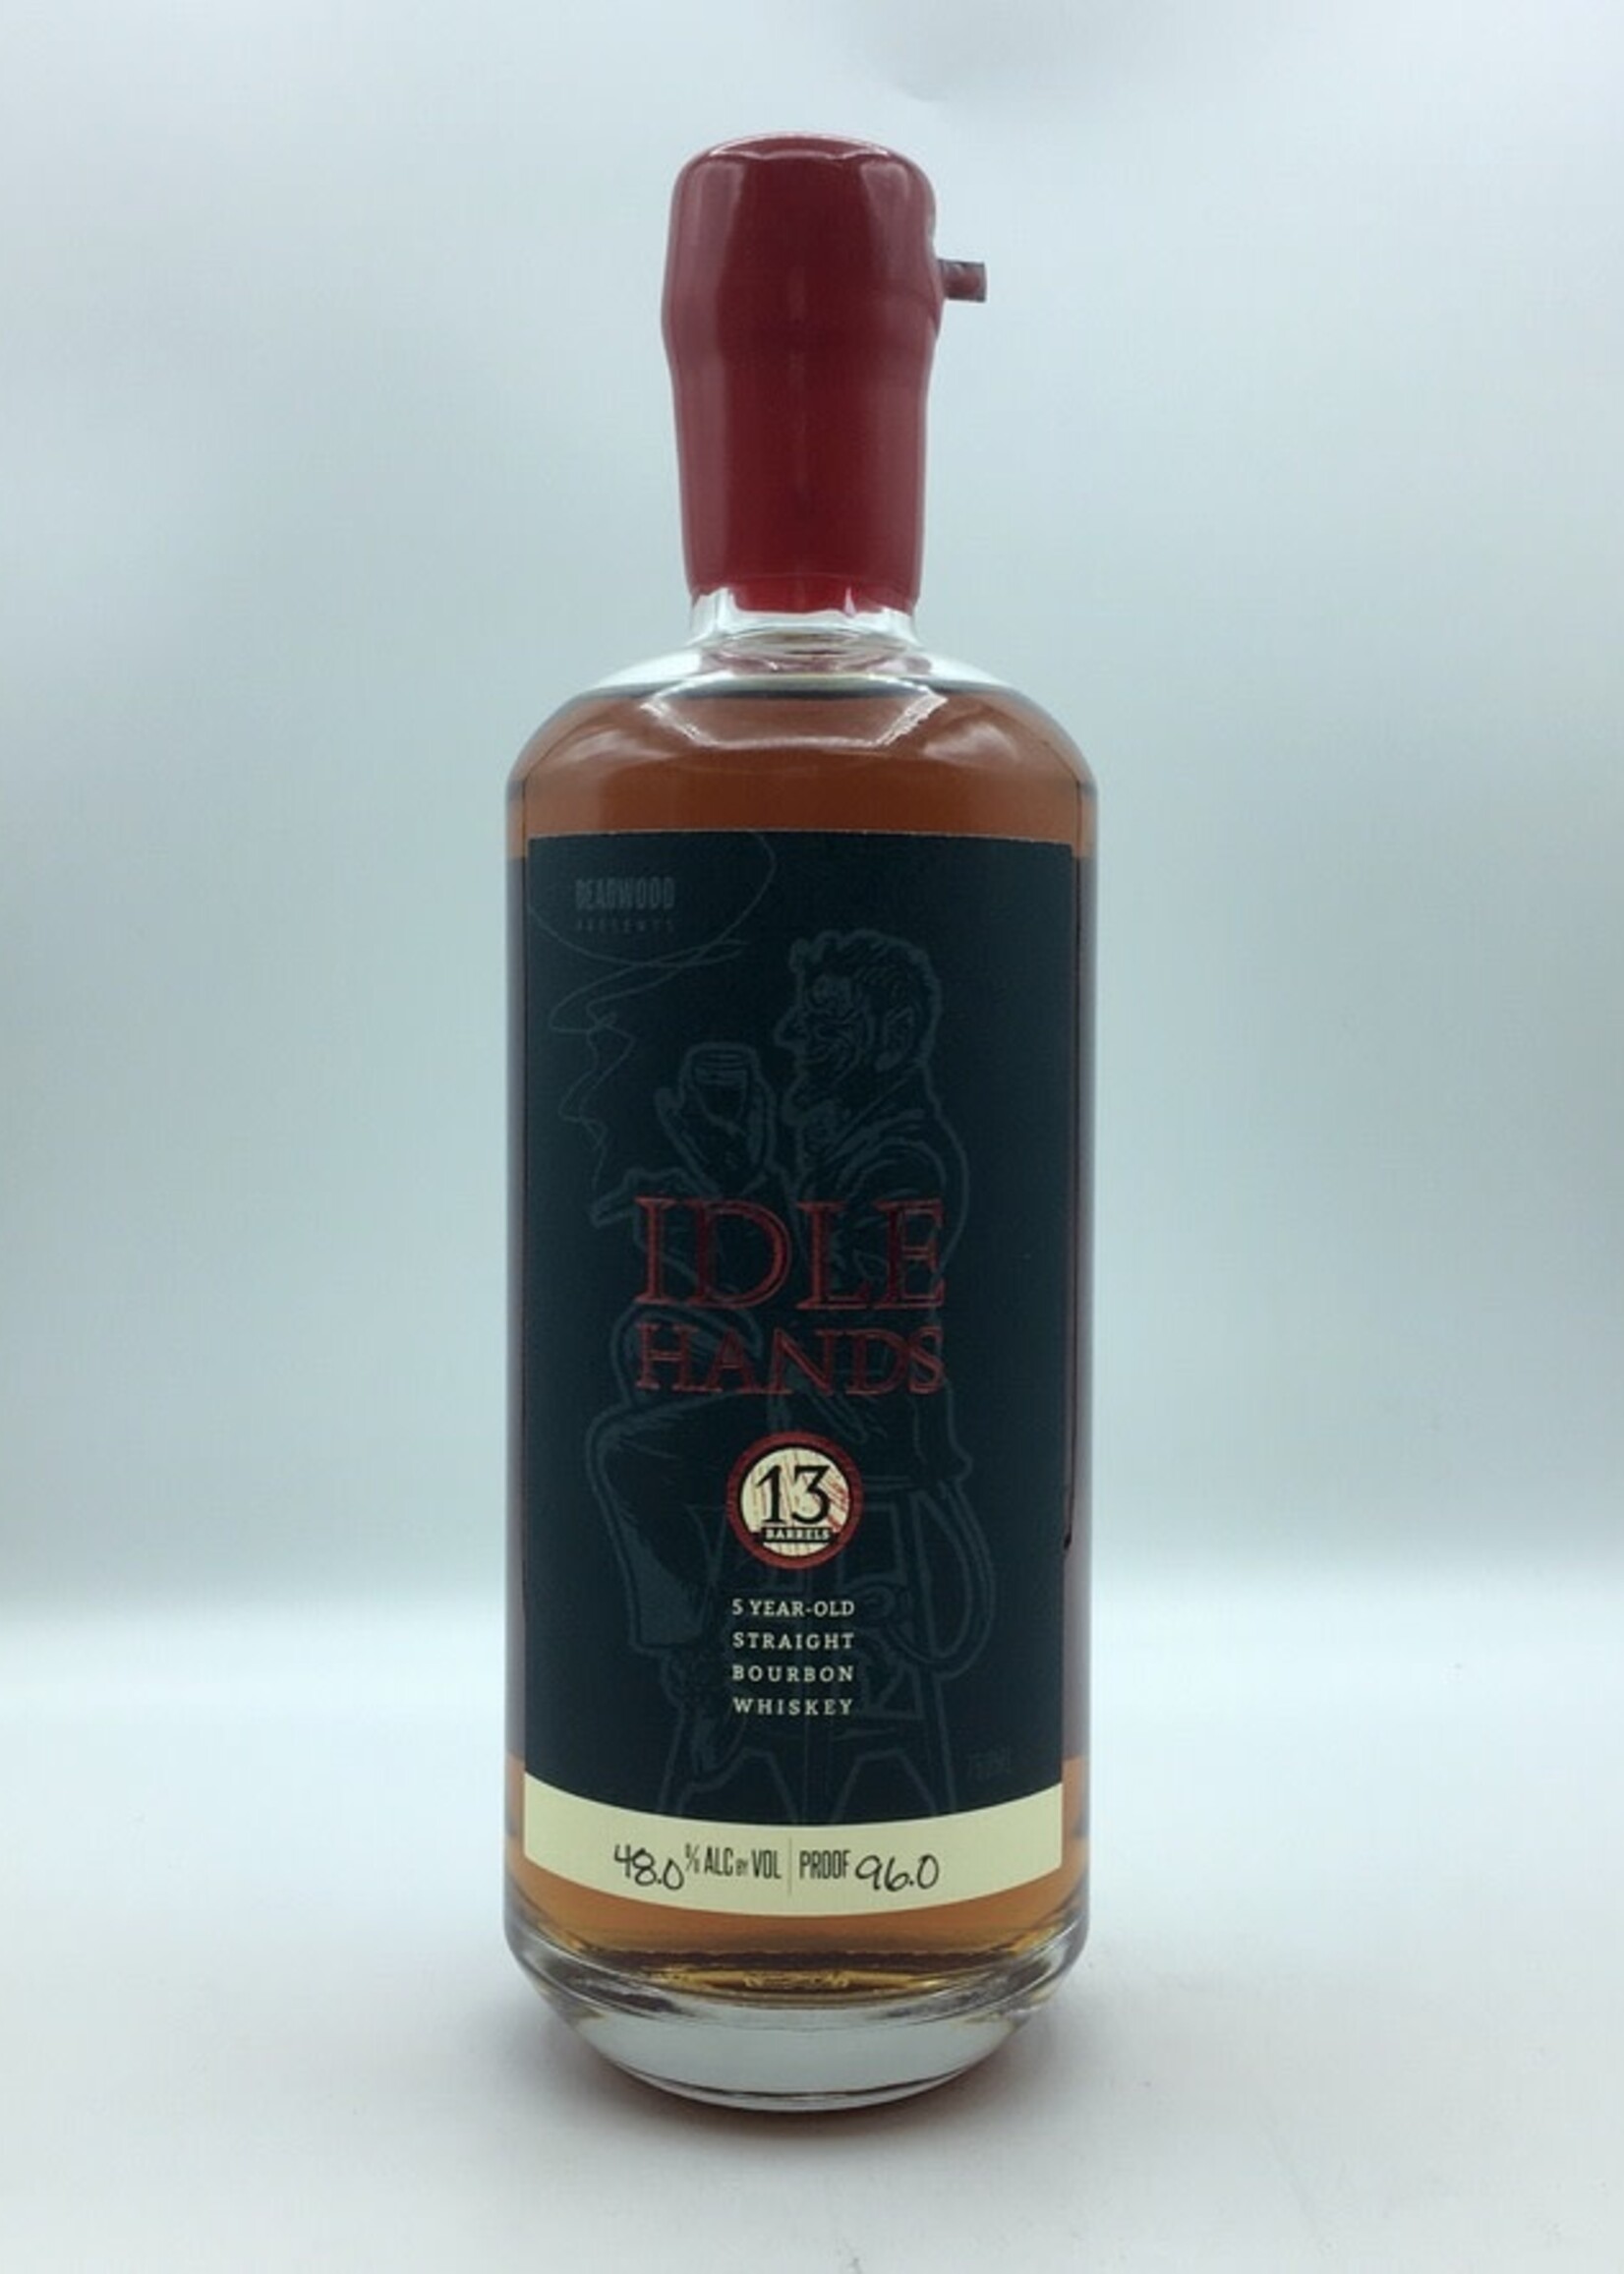 Proof & Woods Idle Hands 5YR Bourbon Whiskey 750ML